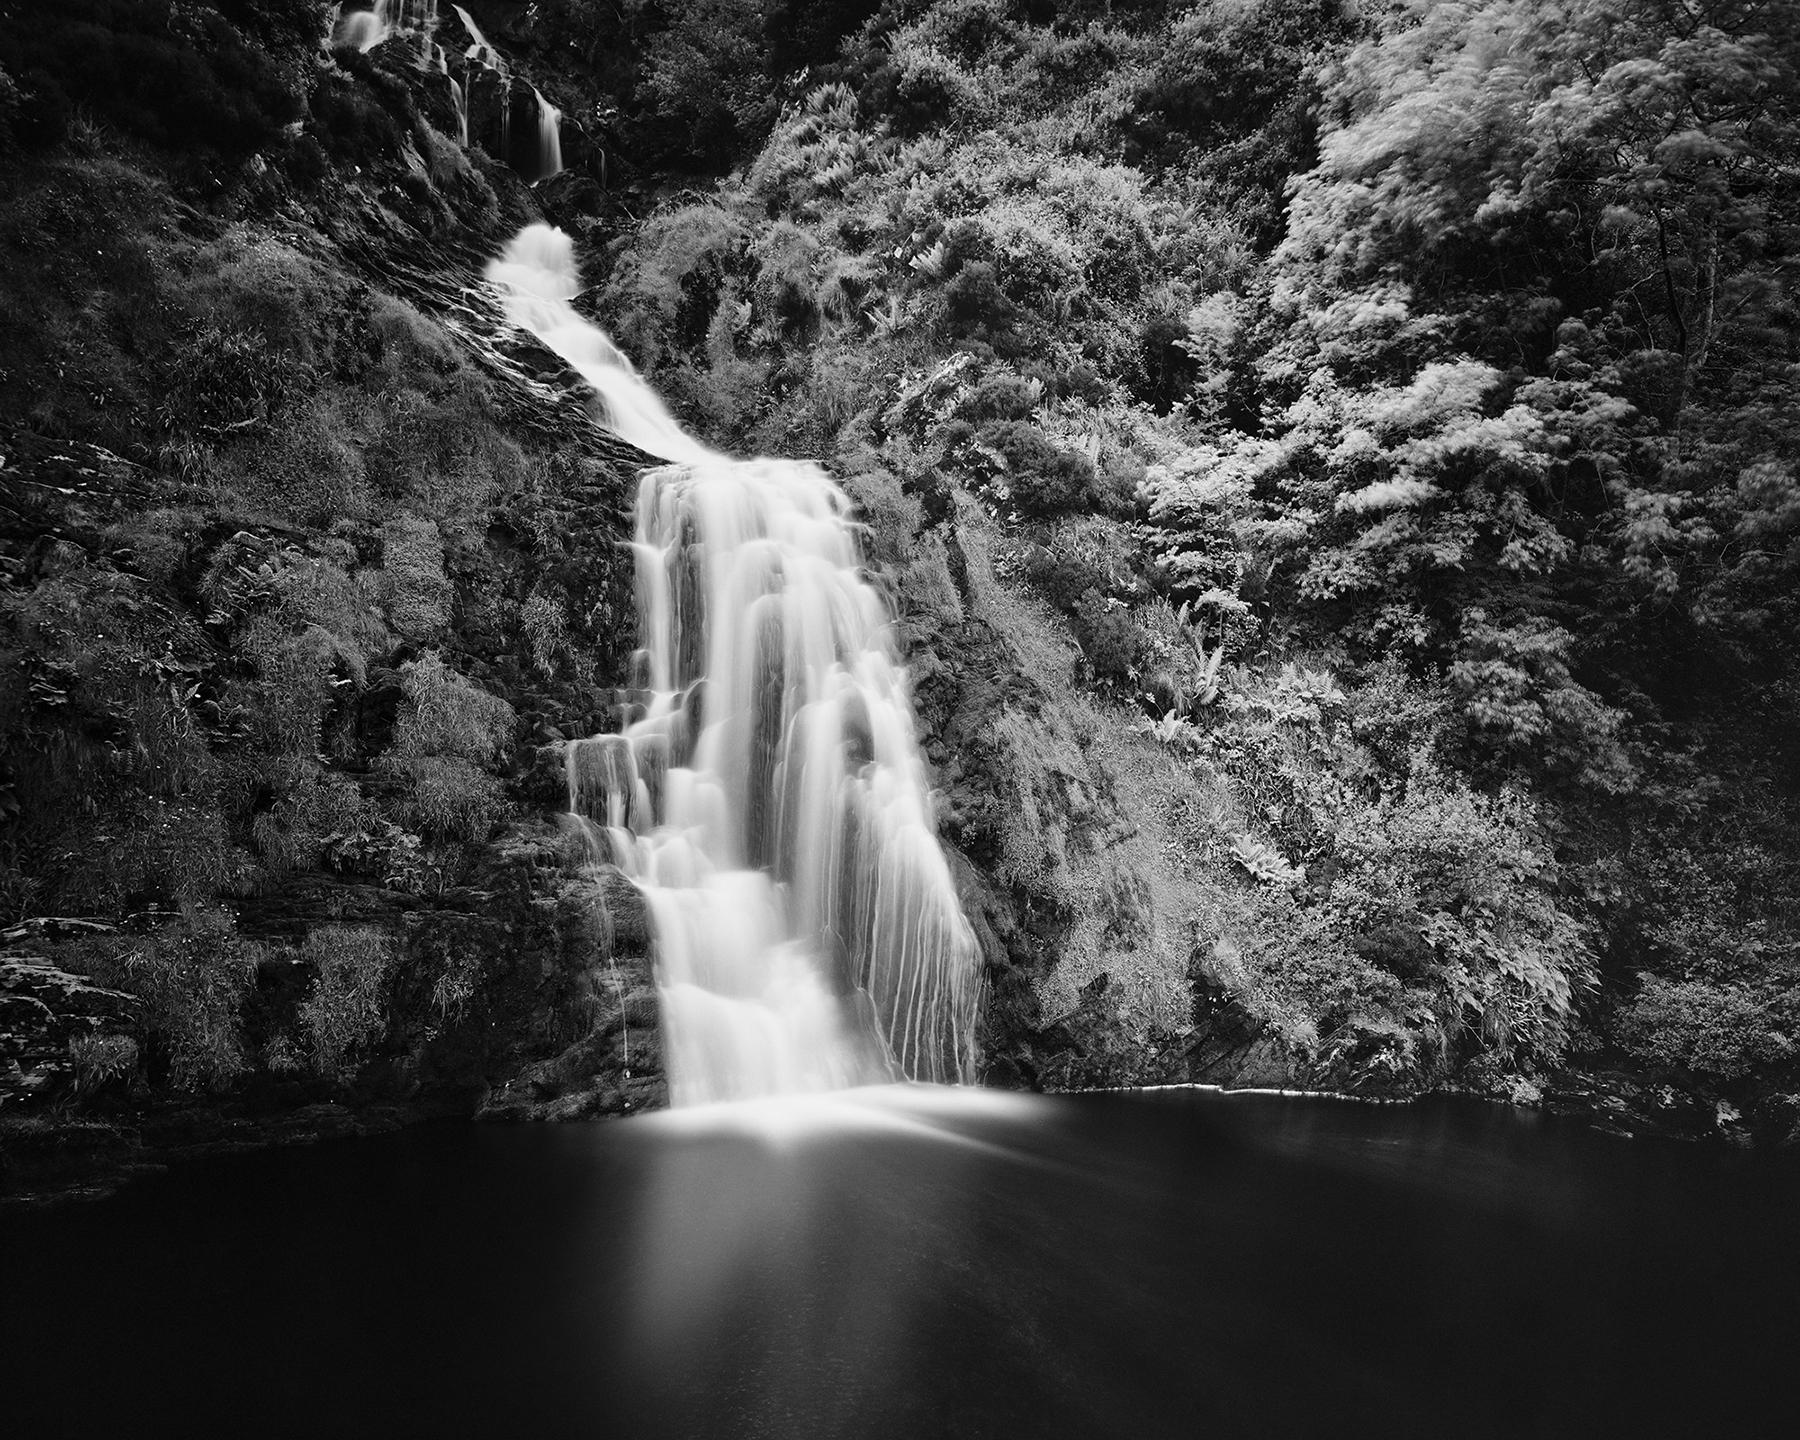 Gerald Berghammer Landscape Photograph - Waterfall, Ireland, black and white art photography, waterscape, long exposure 